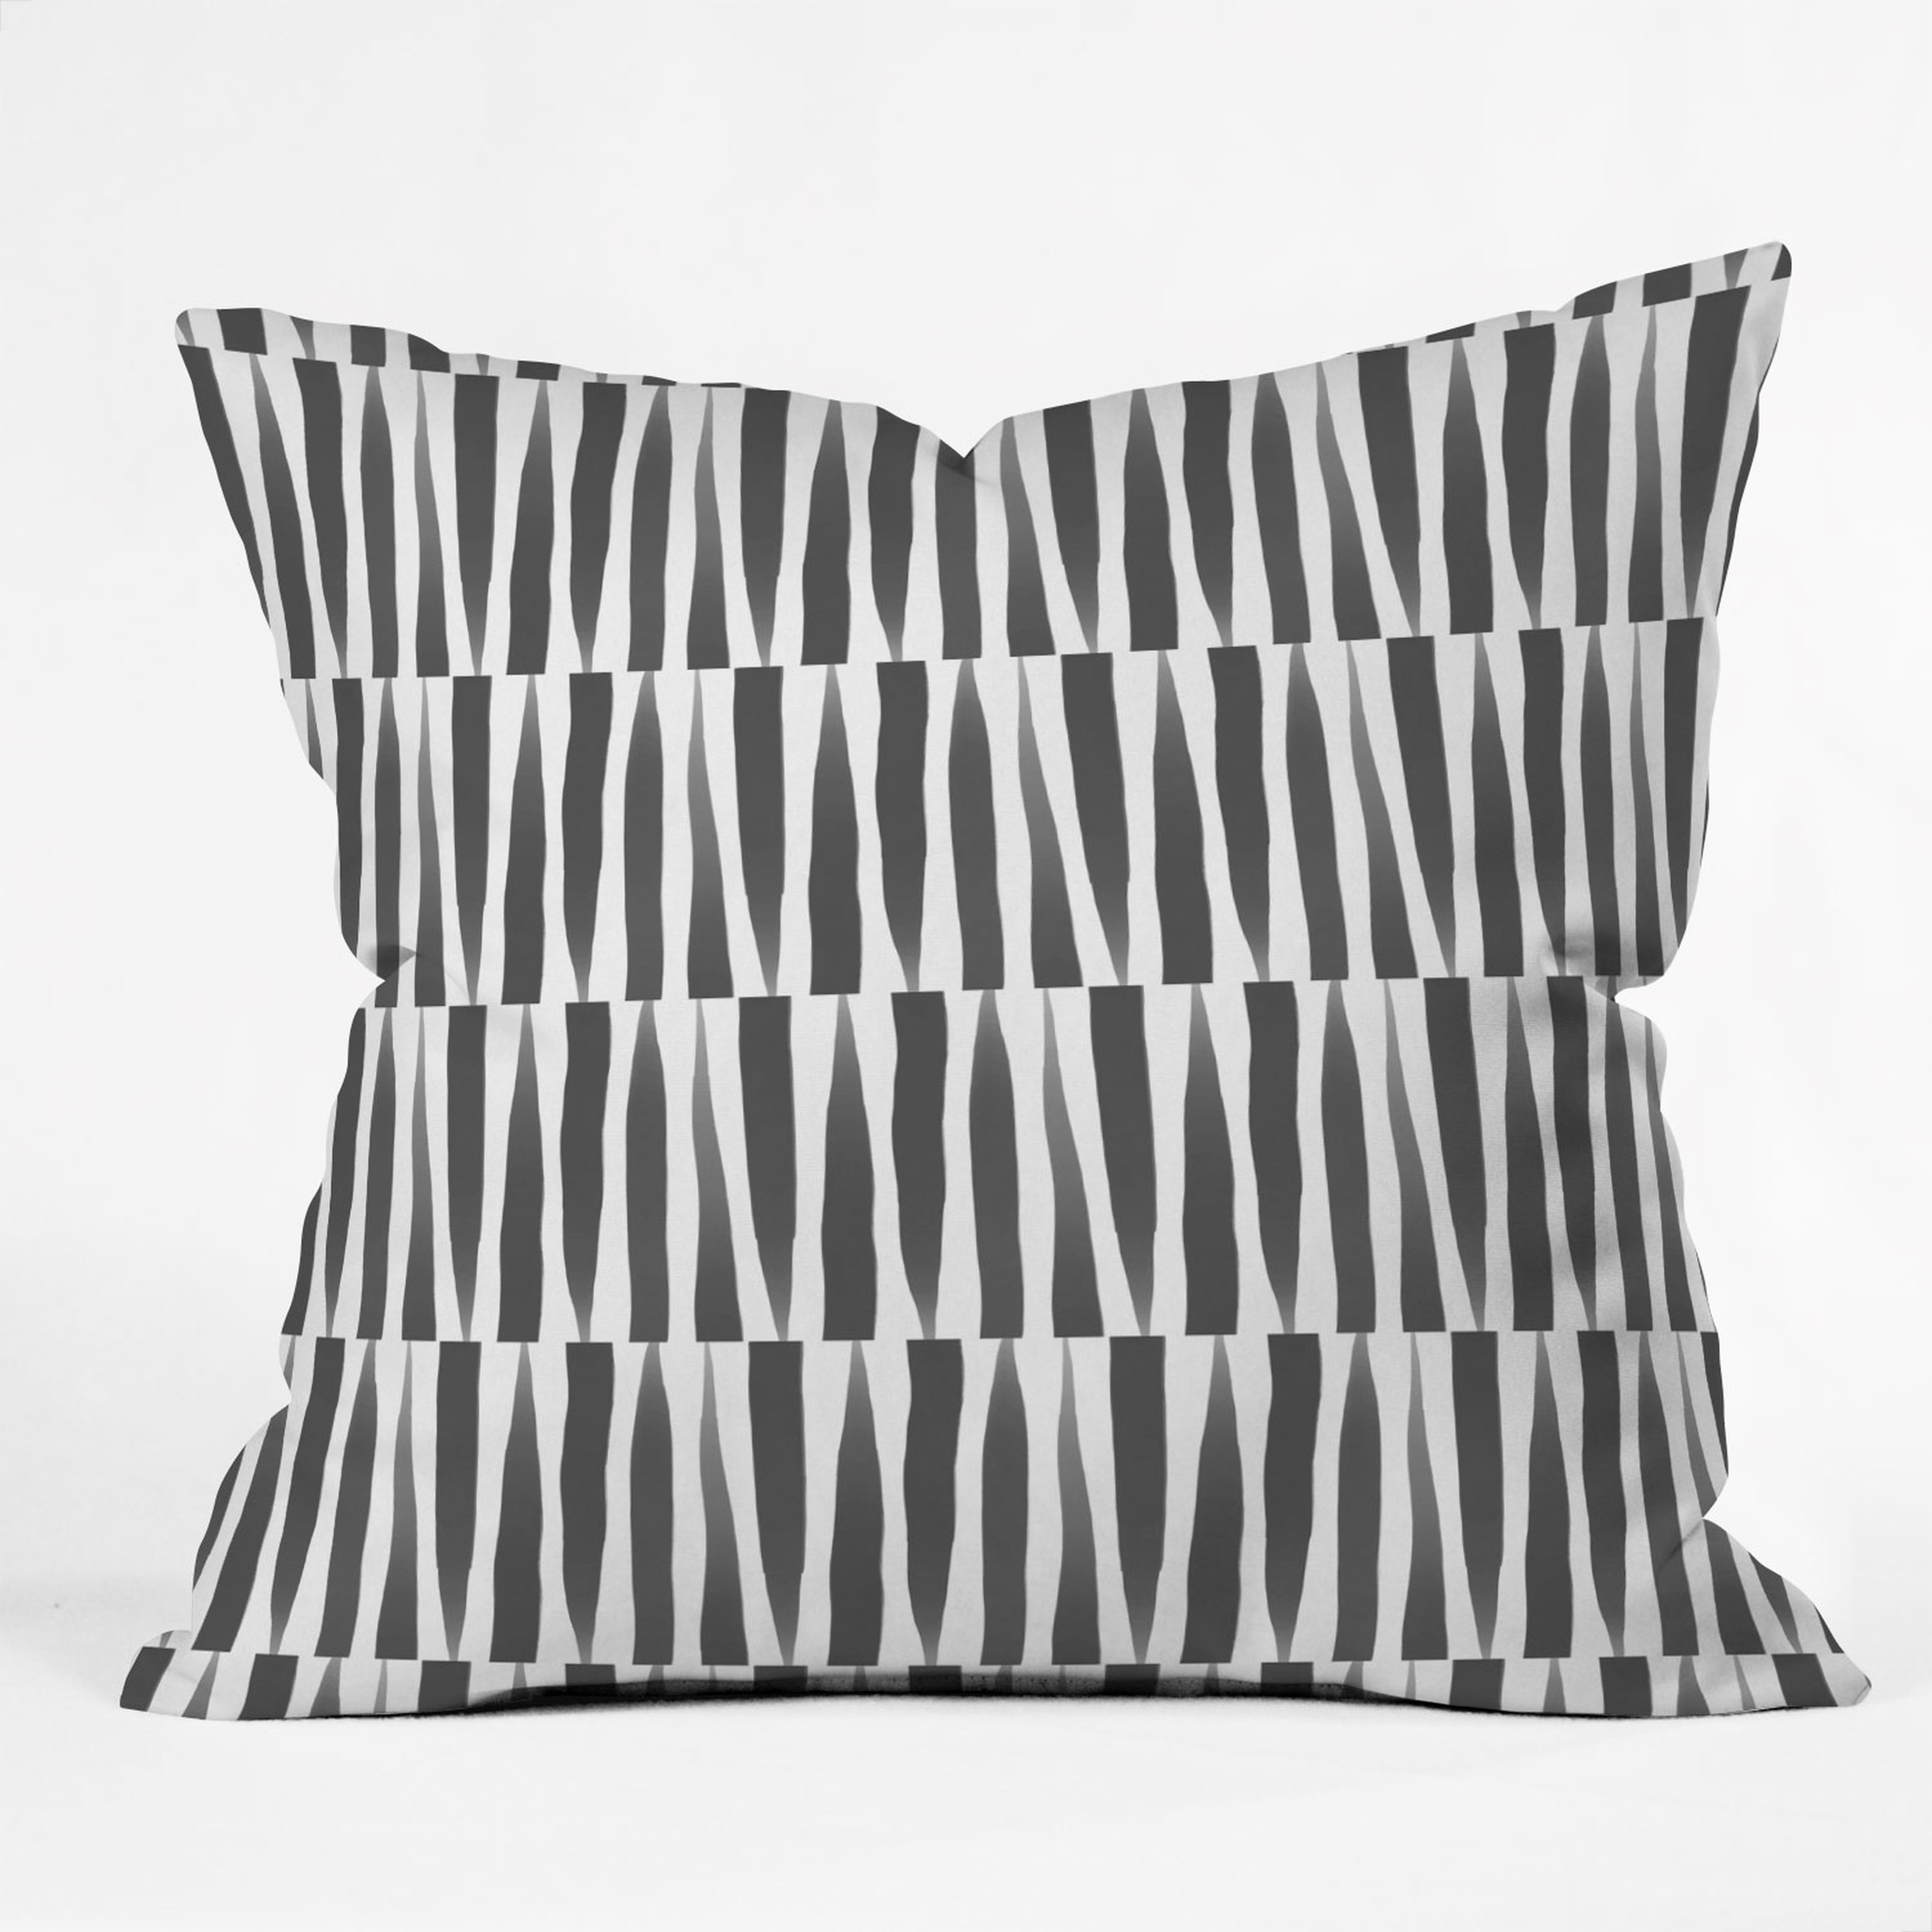 Bw Abstract Theme by Emanuela Carratoni - Outdoor Throw Pillow 18" x 18" - Wander Print Co.